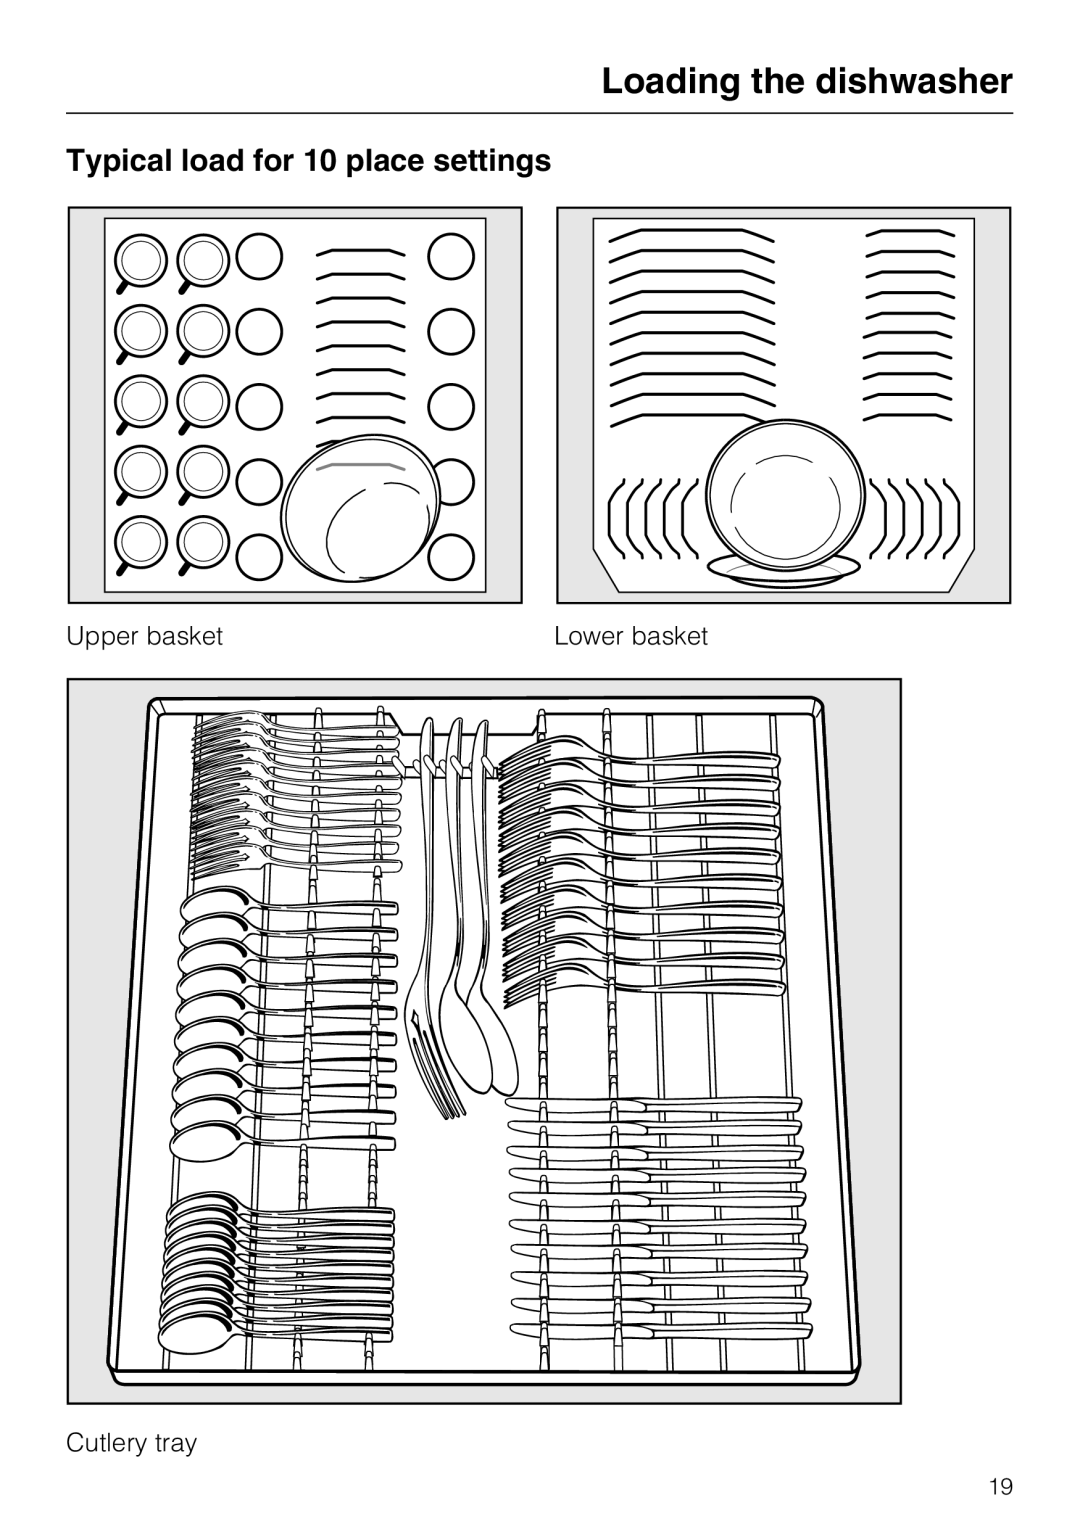 Miele G 5575, G 5570 Typical load for 10 place settings, Loading the dishwasher, Upper basket, Lower basket, Cutlery tray 